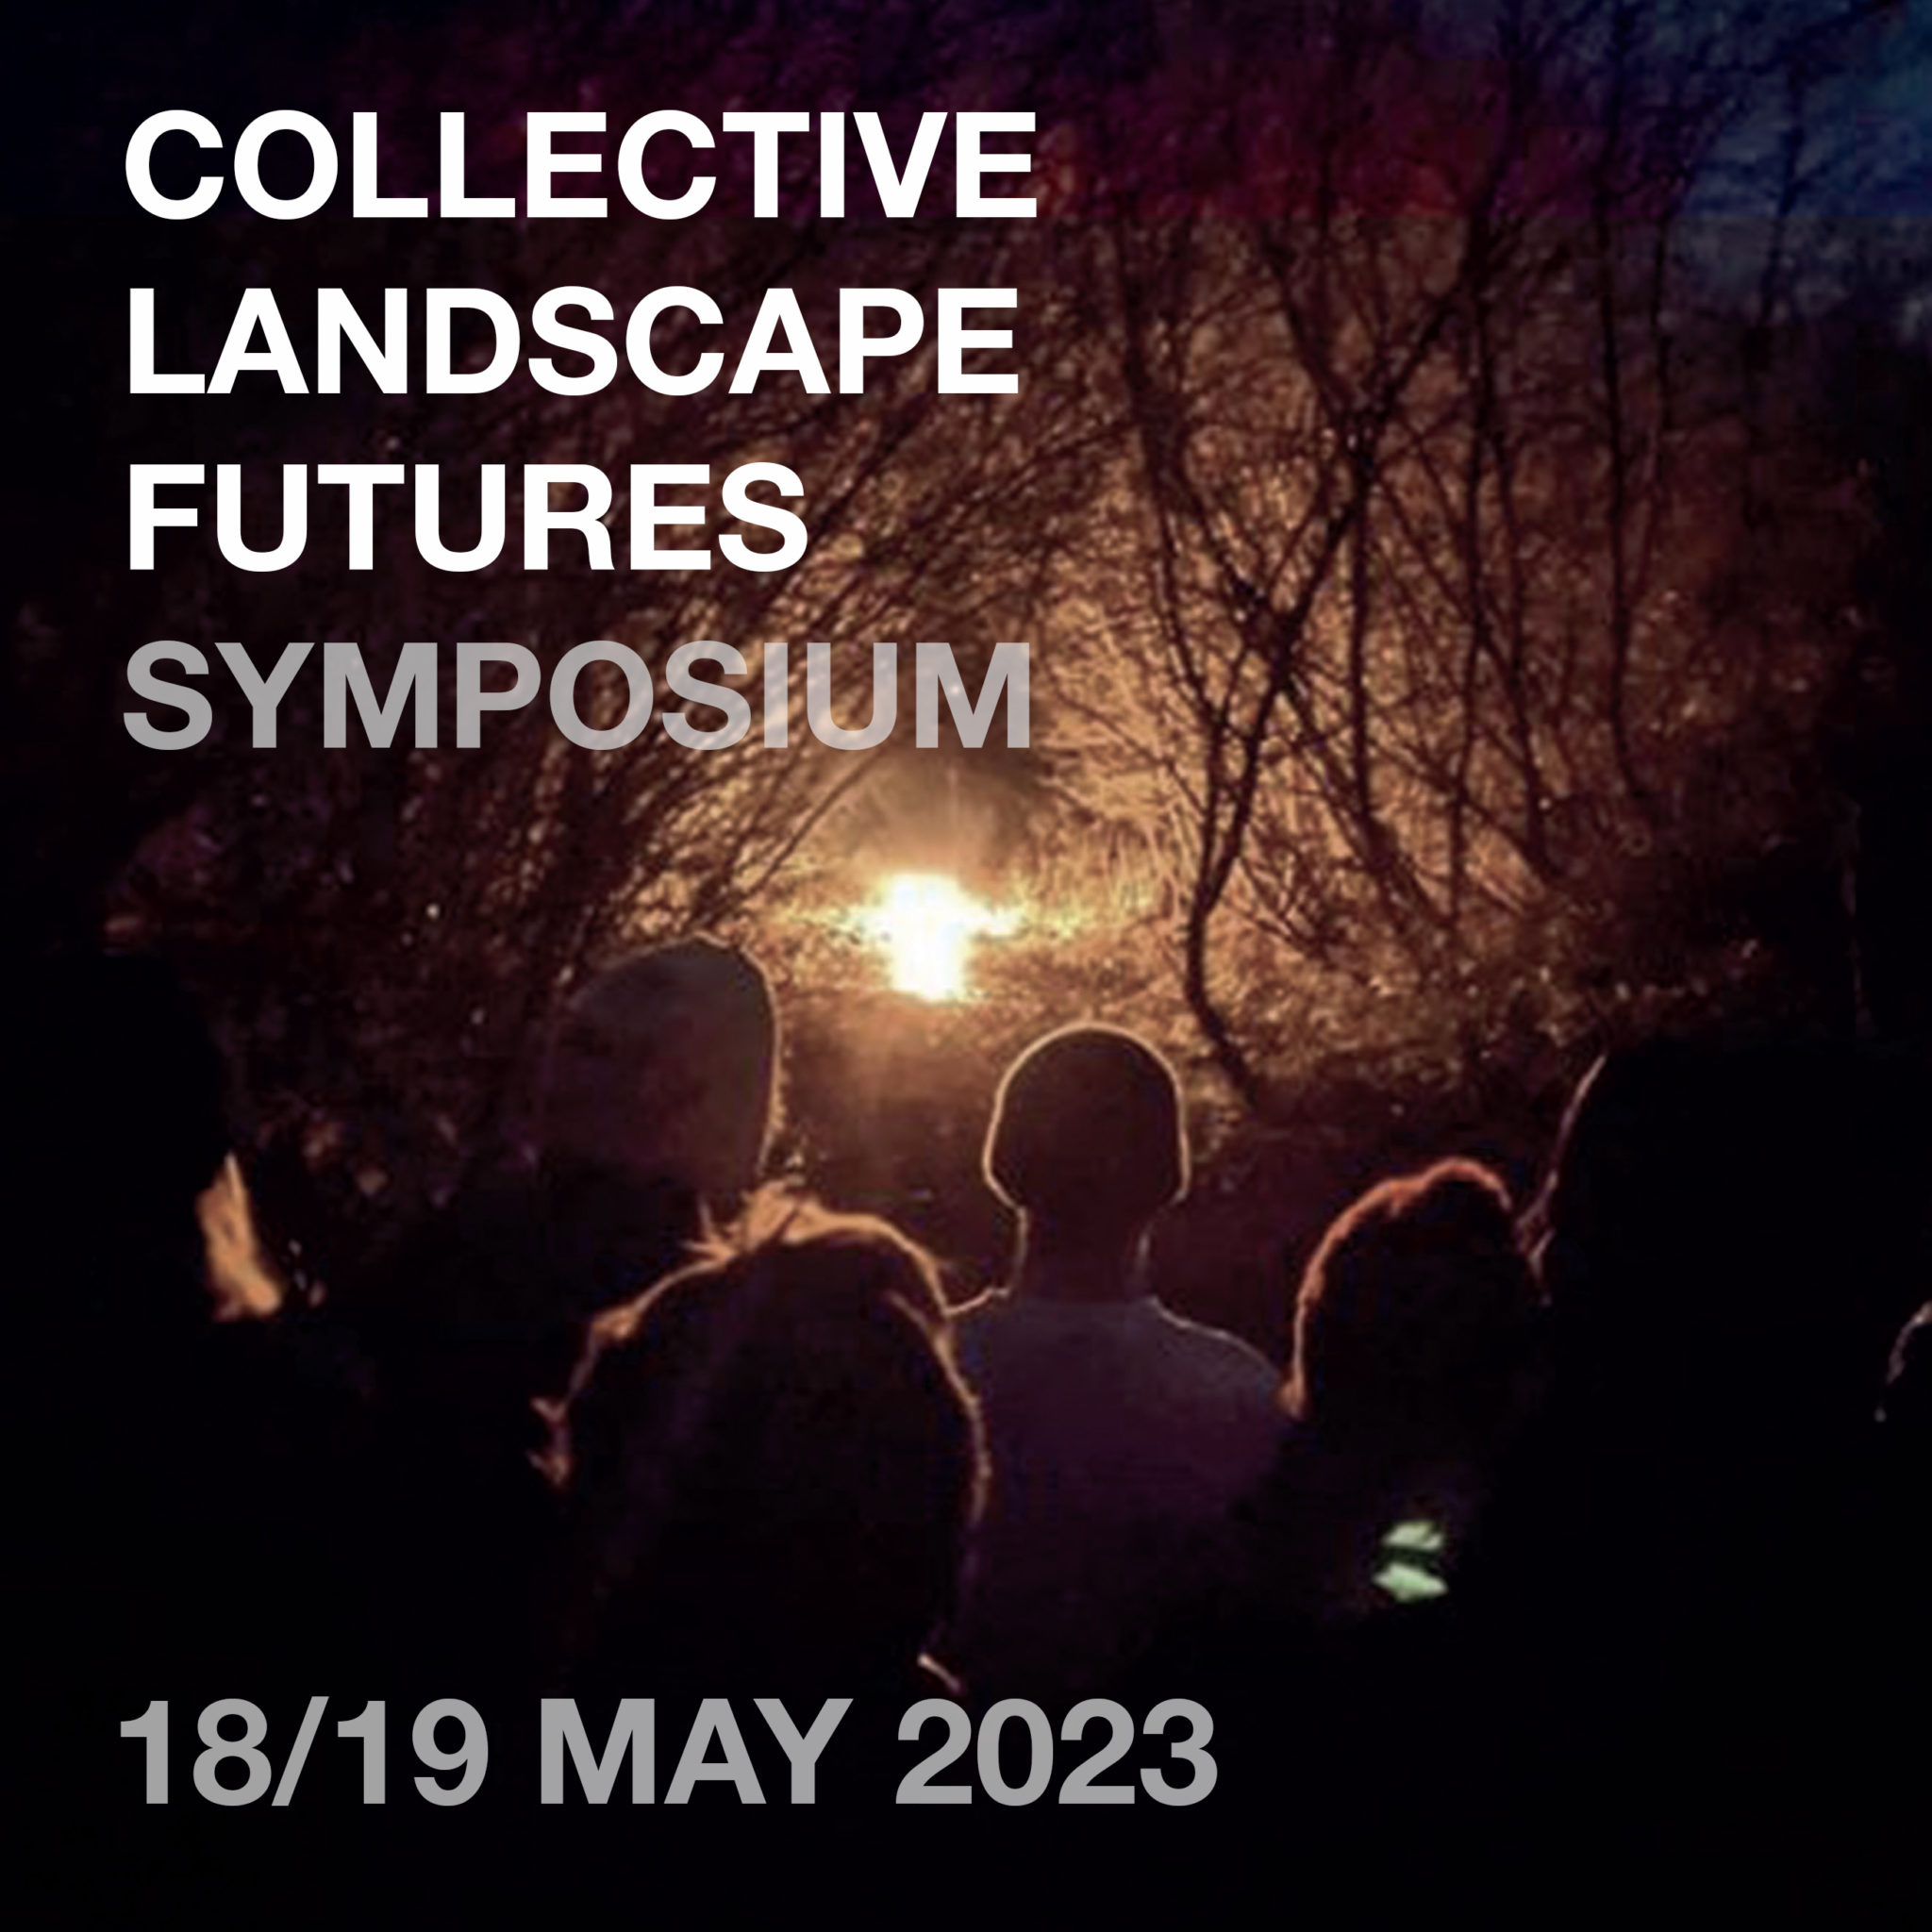 Call for papers: Collective Landscape Futures symposium